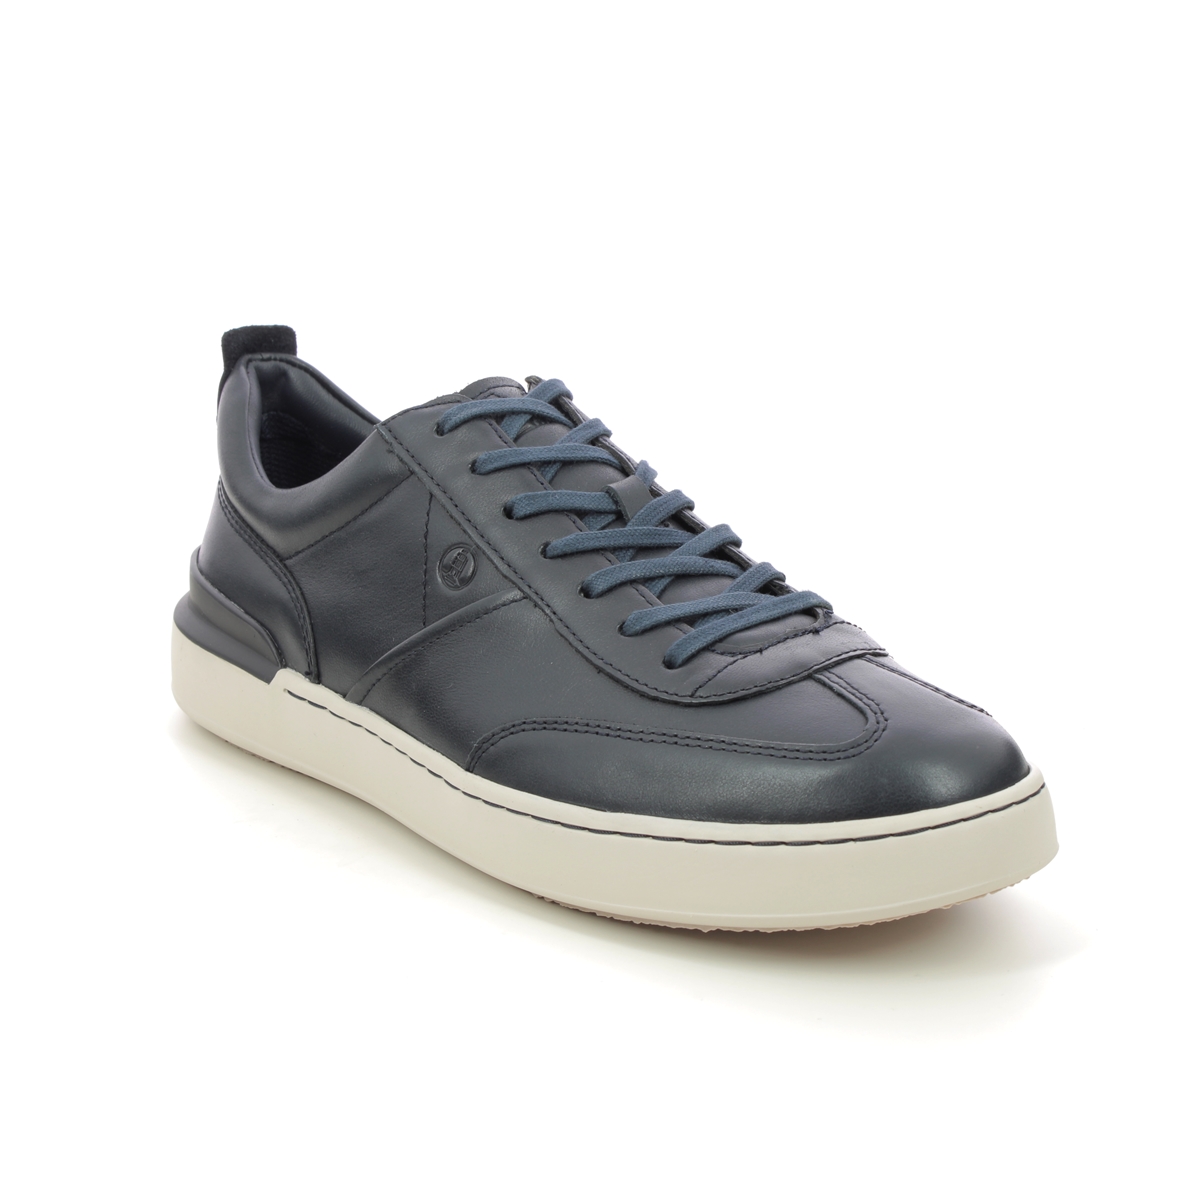 Clarks Courtlite Mode Navy Leather Mens Trainers 734747G In Size 8.5 In Plain Navy Leather G Width Fitting